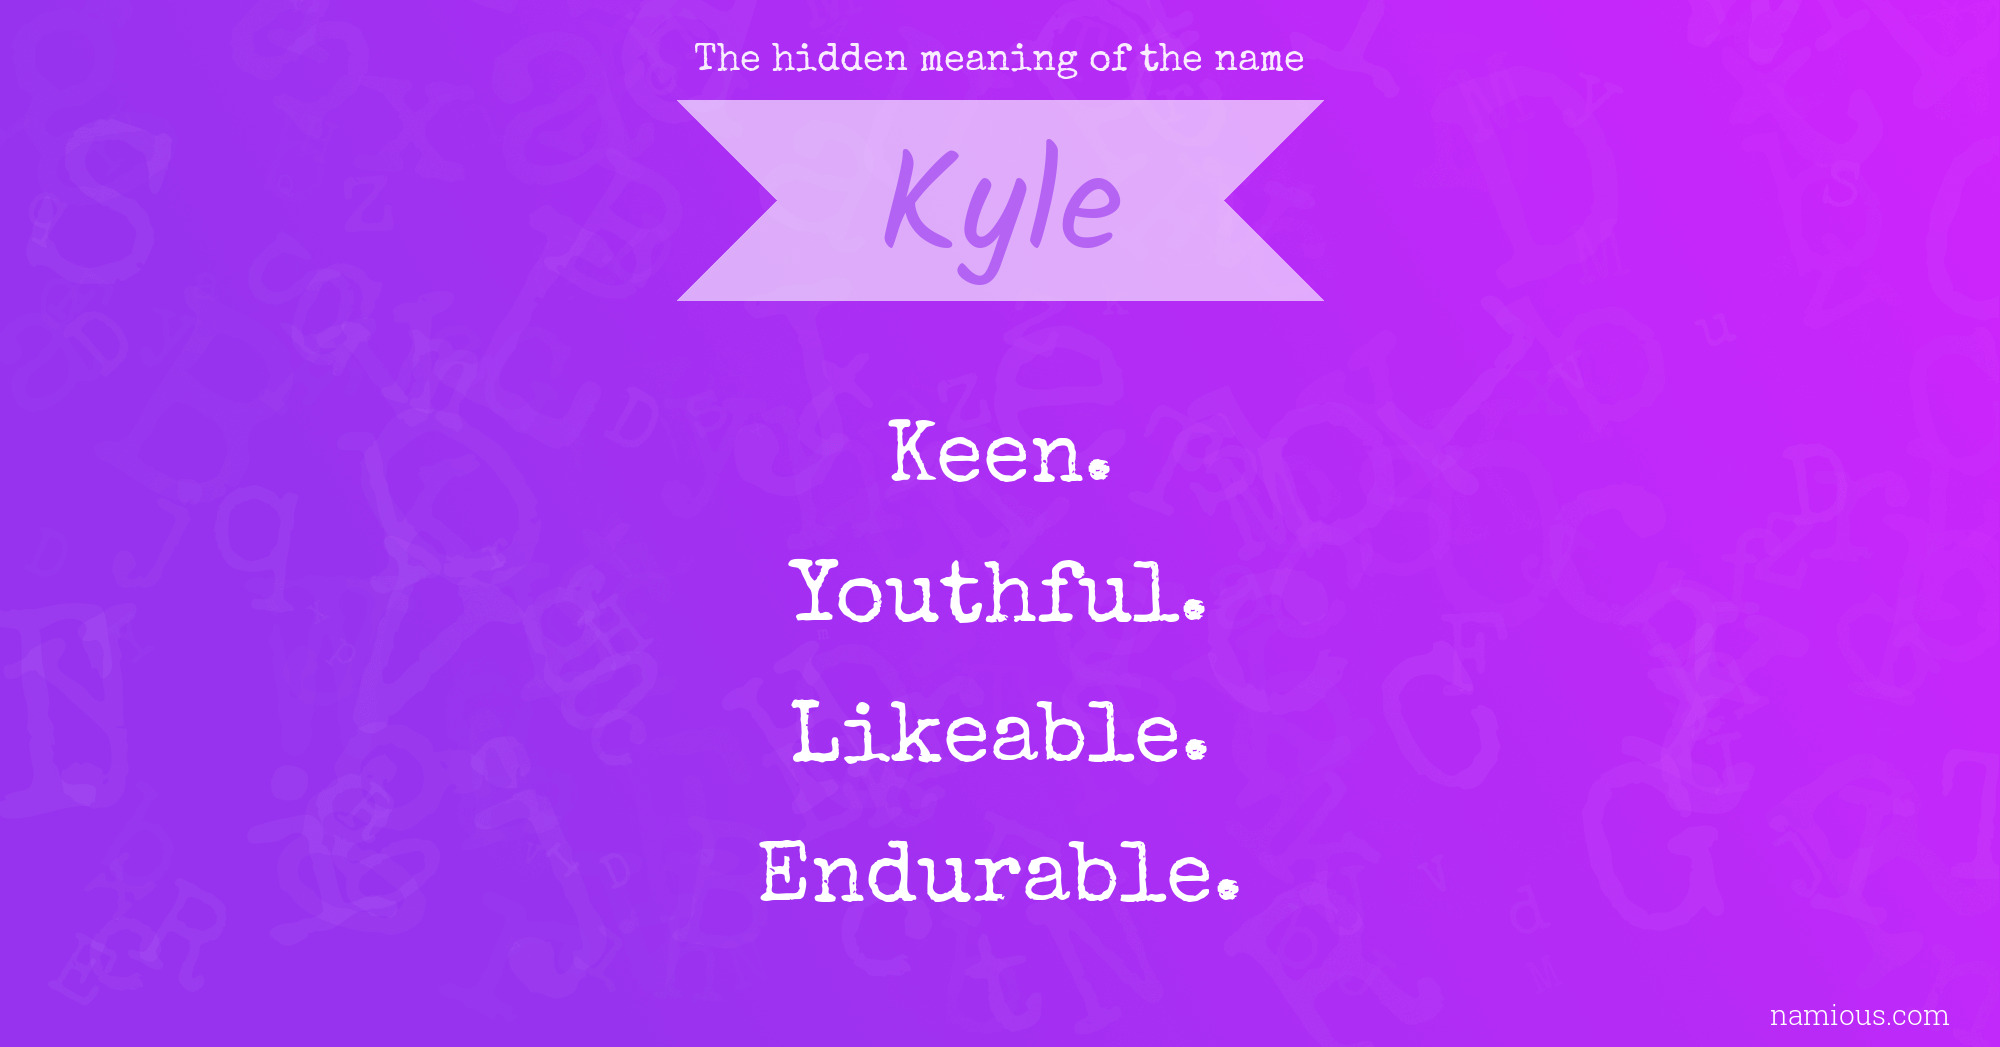 The hidden meaning of the name Kyle